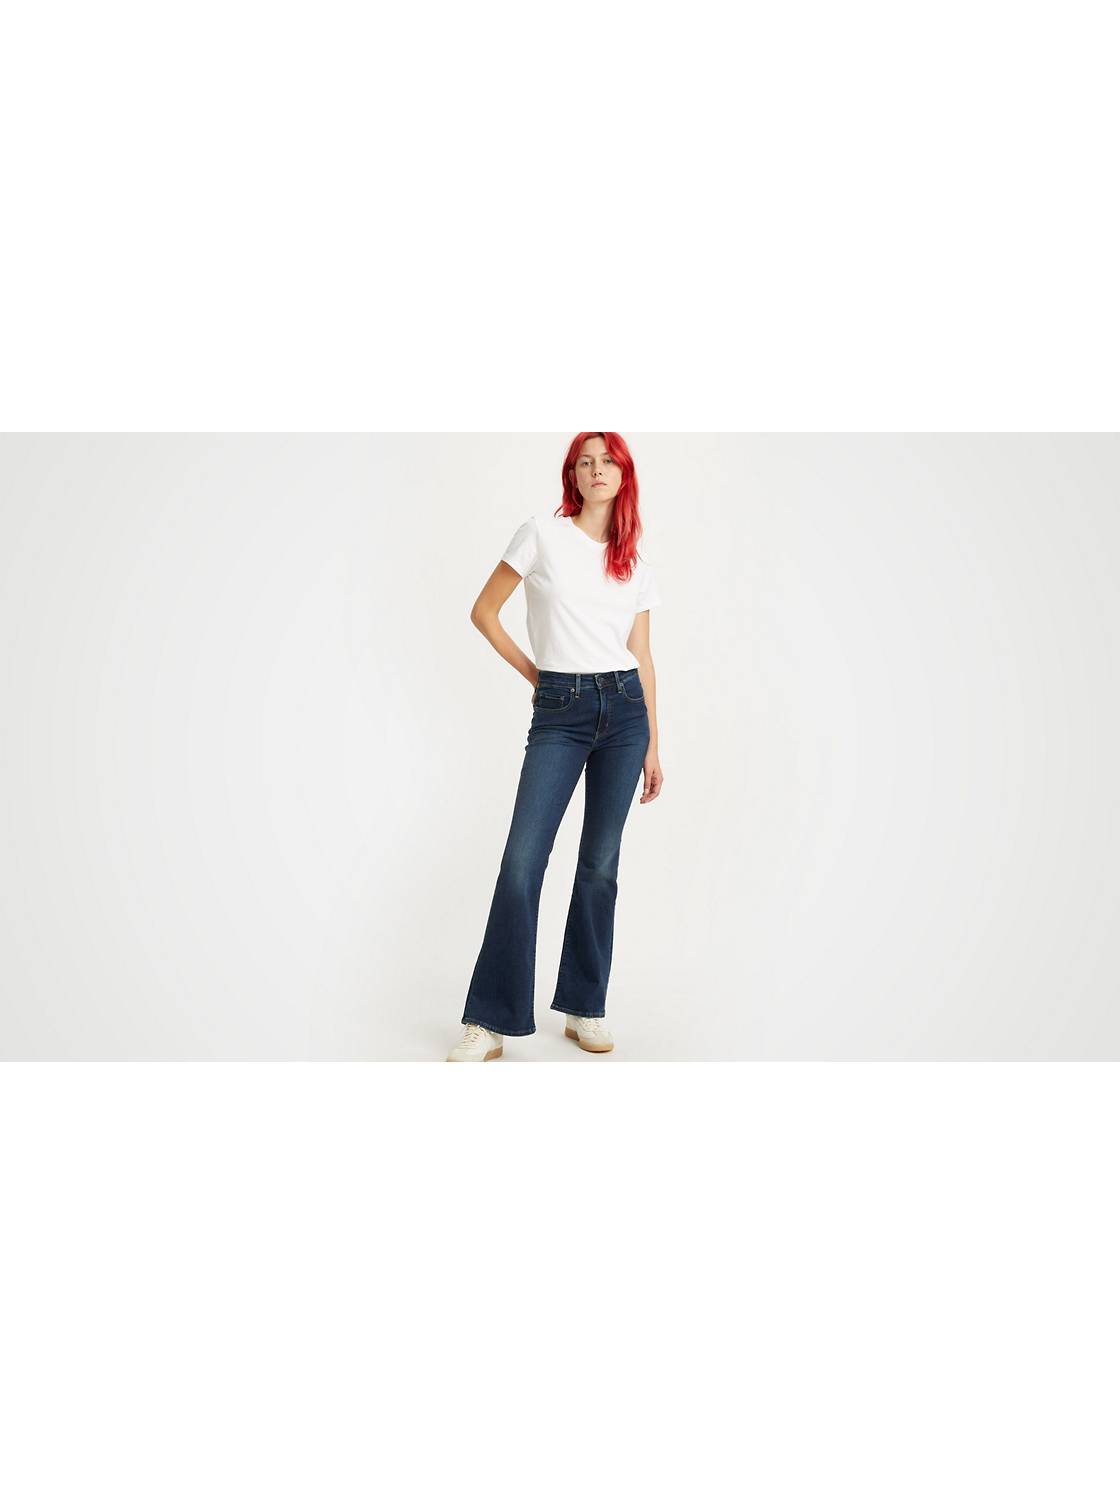 Levi's Flared Jeans for Women